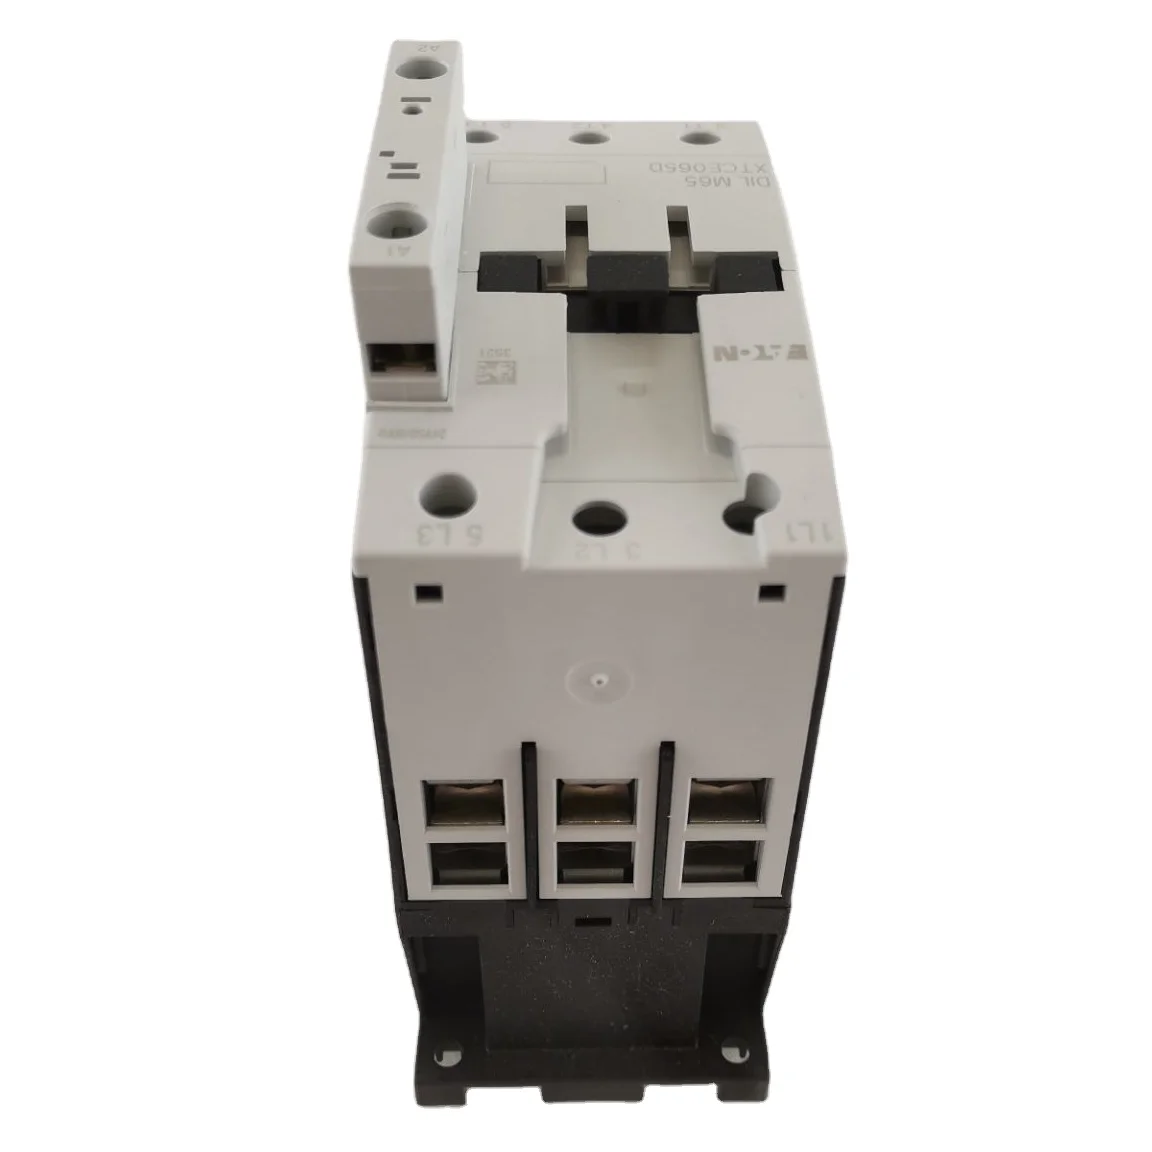 

AC contactor DILM65 XTCE065D 24V